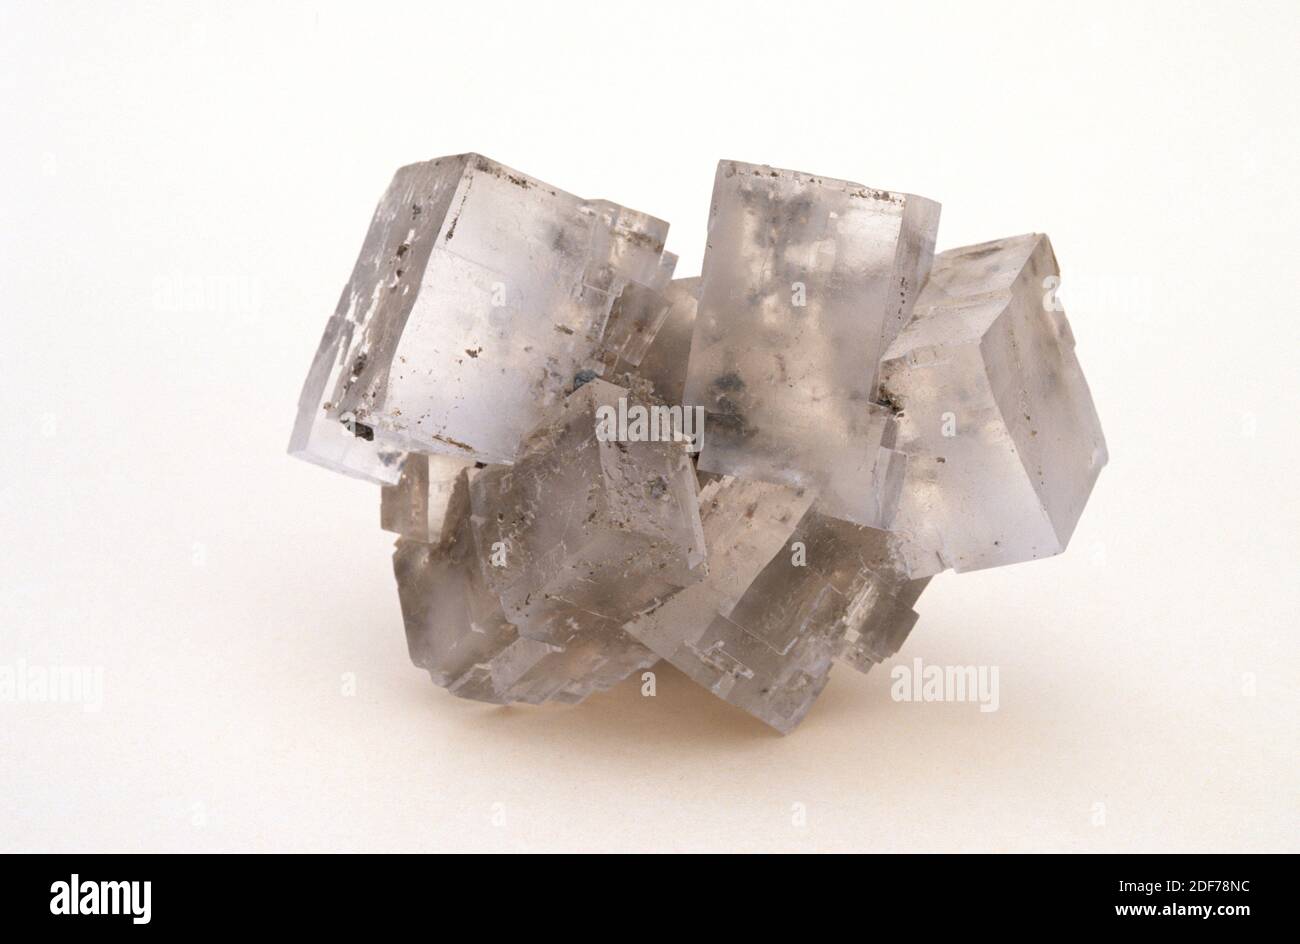 Halite or rock salt is a sodium chloride mineral. Crystallized sample. Stock Photo